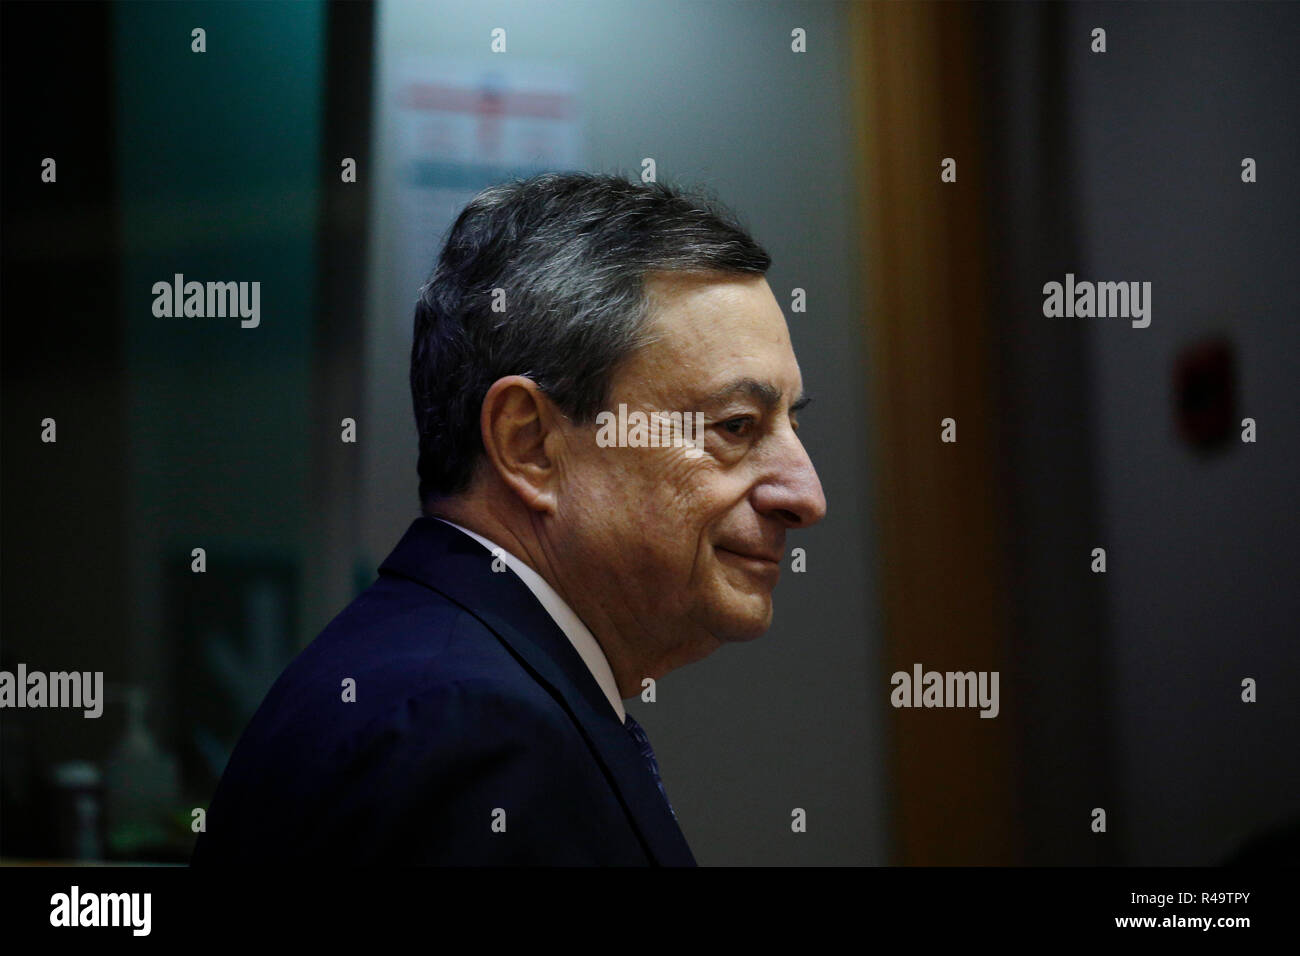 Brussels, Belgium. 26th November 2018. President of the European Central Bank, Mario Draghi delivers a speech at the European Parliament Committee on Economic and Monetary Affairs      . Alexandros Michailidis/Alamy Live News Stock Photo